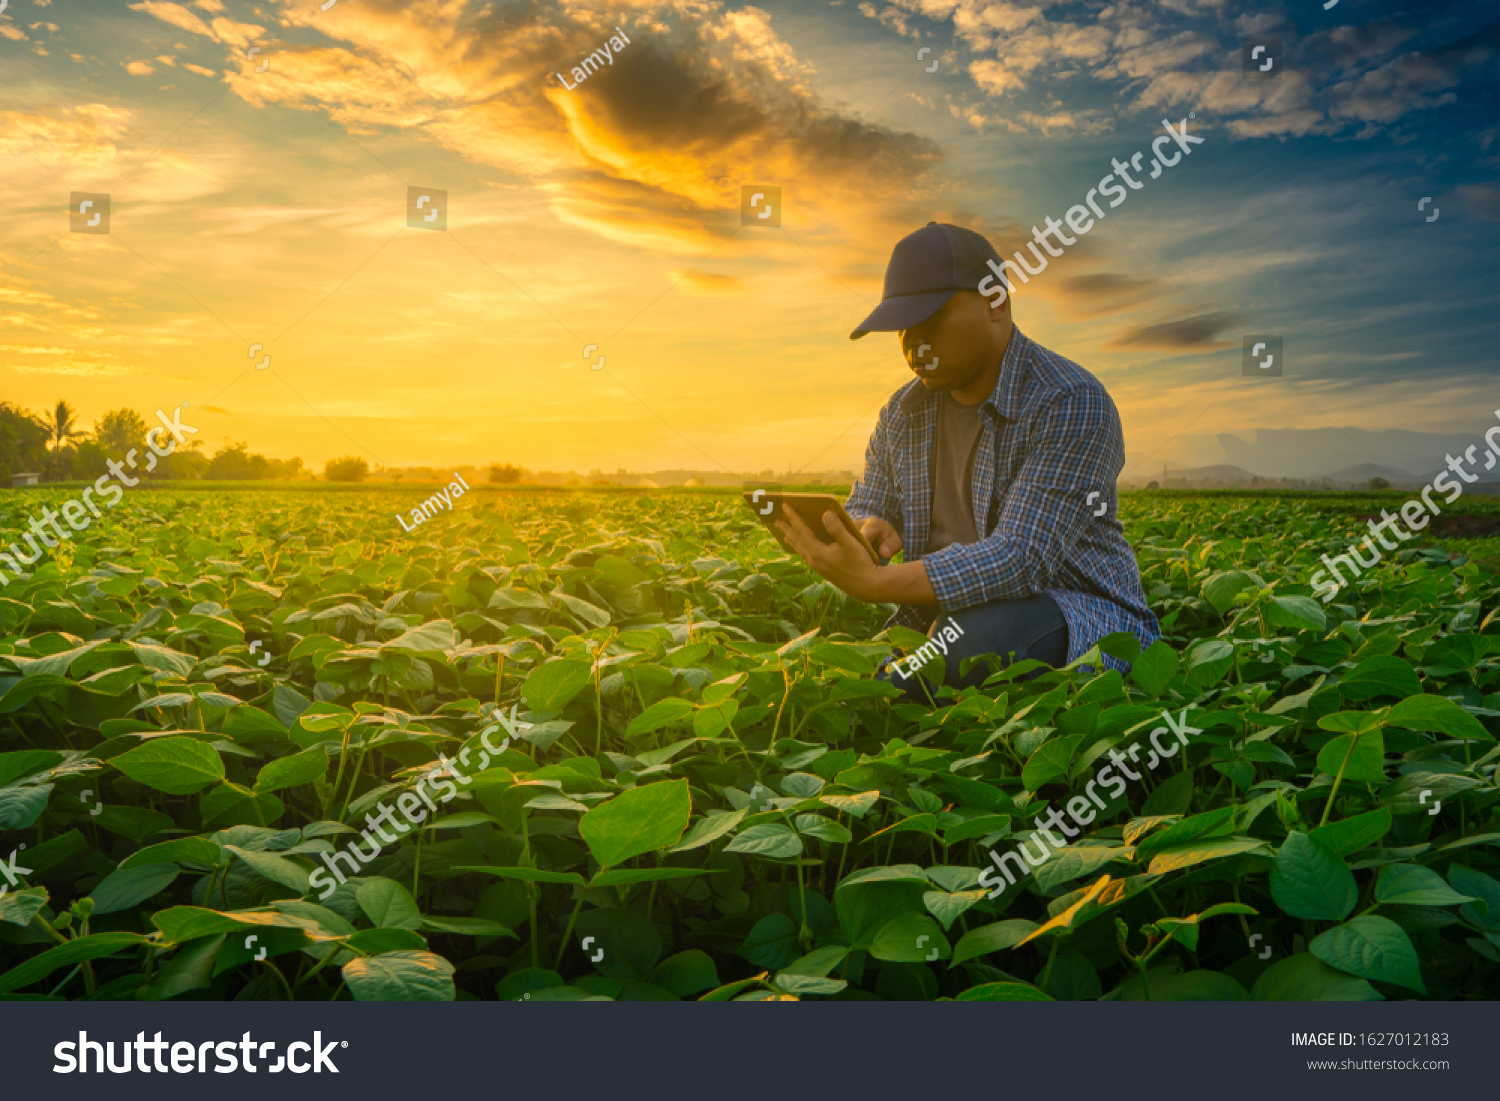 smart farmer concept using smartphone in mung bean garden with light shines sunset, modern technology application in agricultural growing activity #1627012183